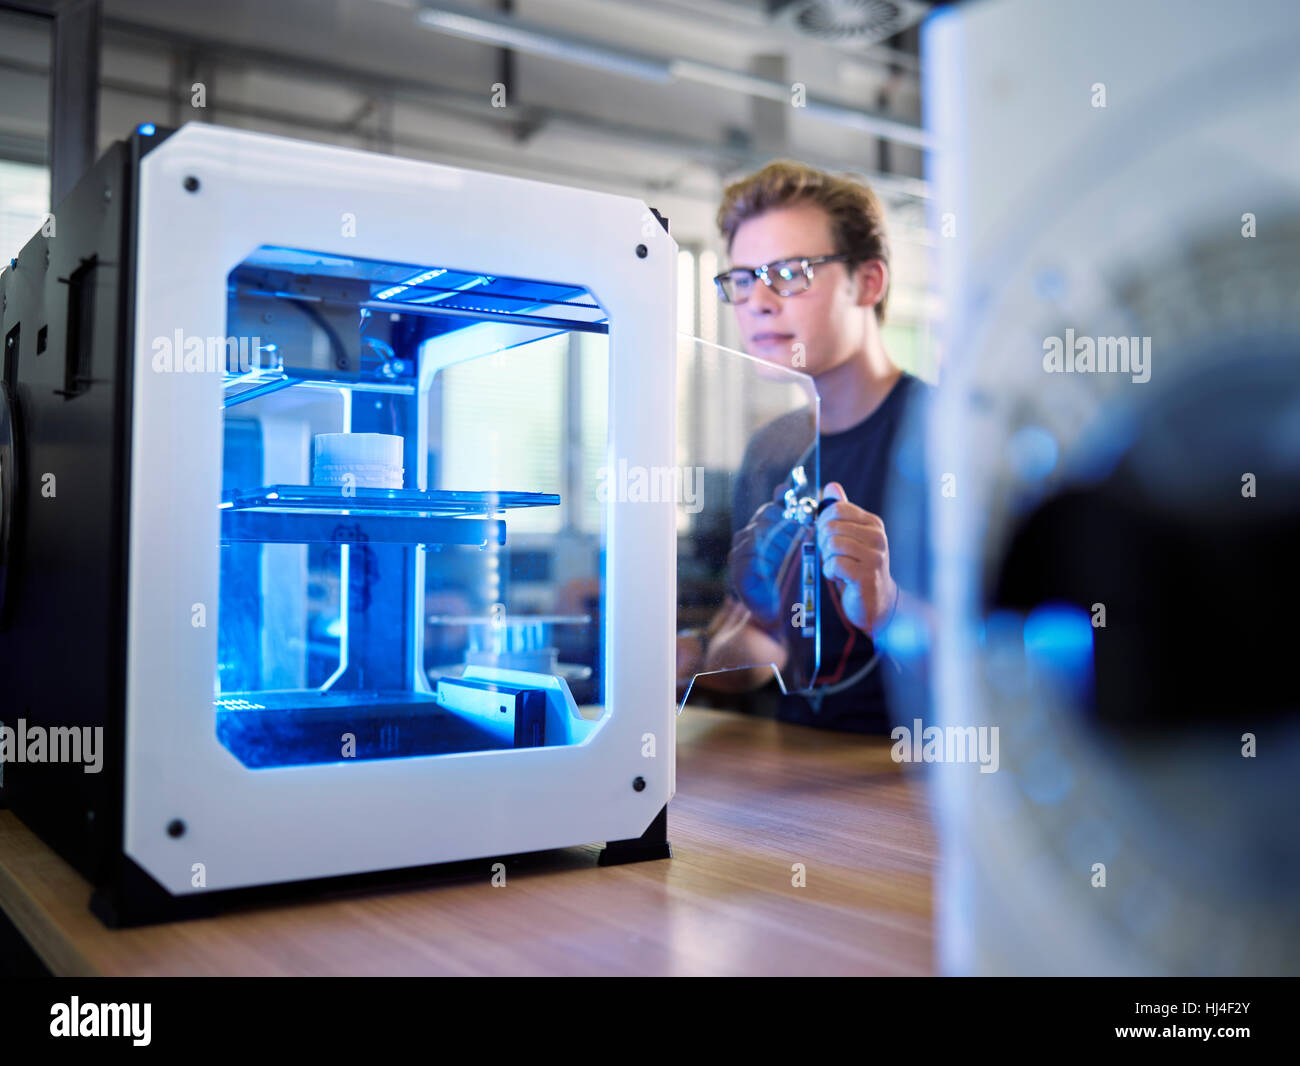 Employee, 25-30 years, opening 3D printer in production laboratory, FabLab, Wattens, Tyrol, Austria Stock Photo